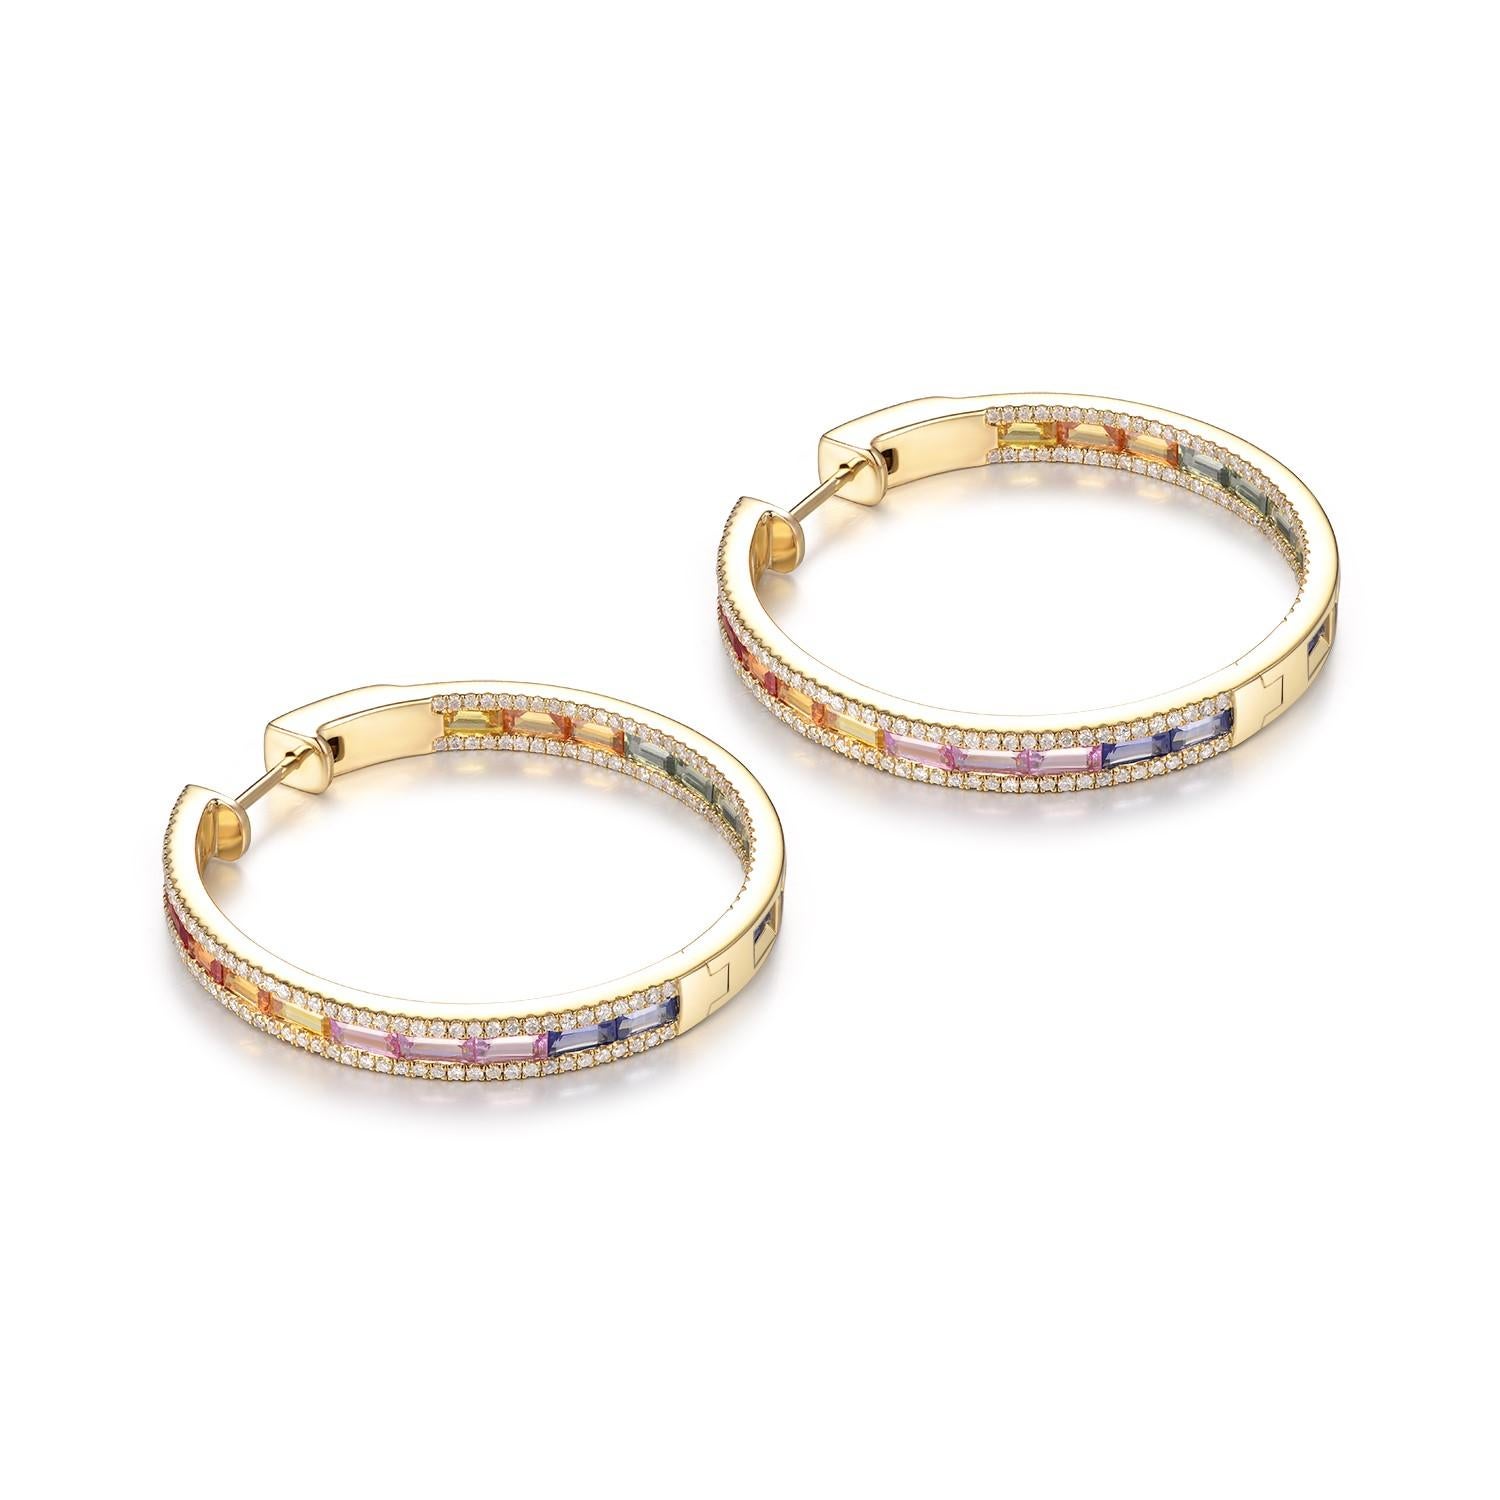 This earrings featured 5.84 carats of taper rainbow sapphire. Assented with 1.27 carats of white round diamonds. Earrings are set in 14 karat yellow gold.  With a push button lock to secure this trendy earrings on your ear lobe. Matching ring is